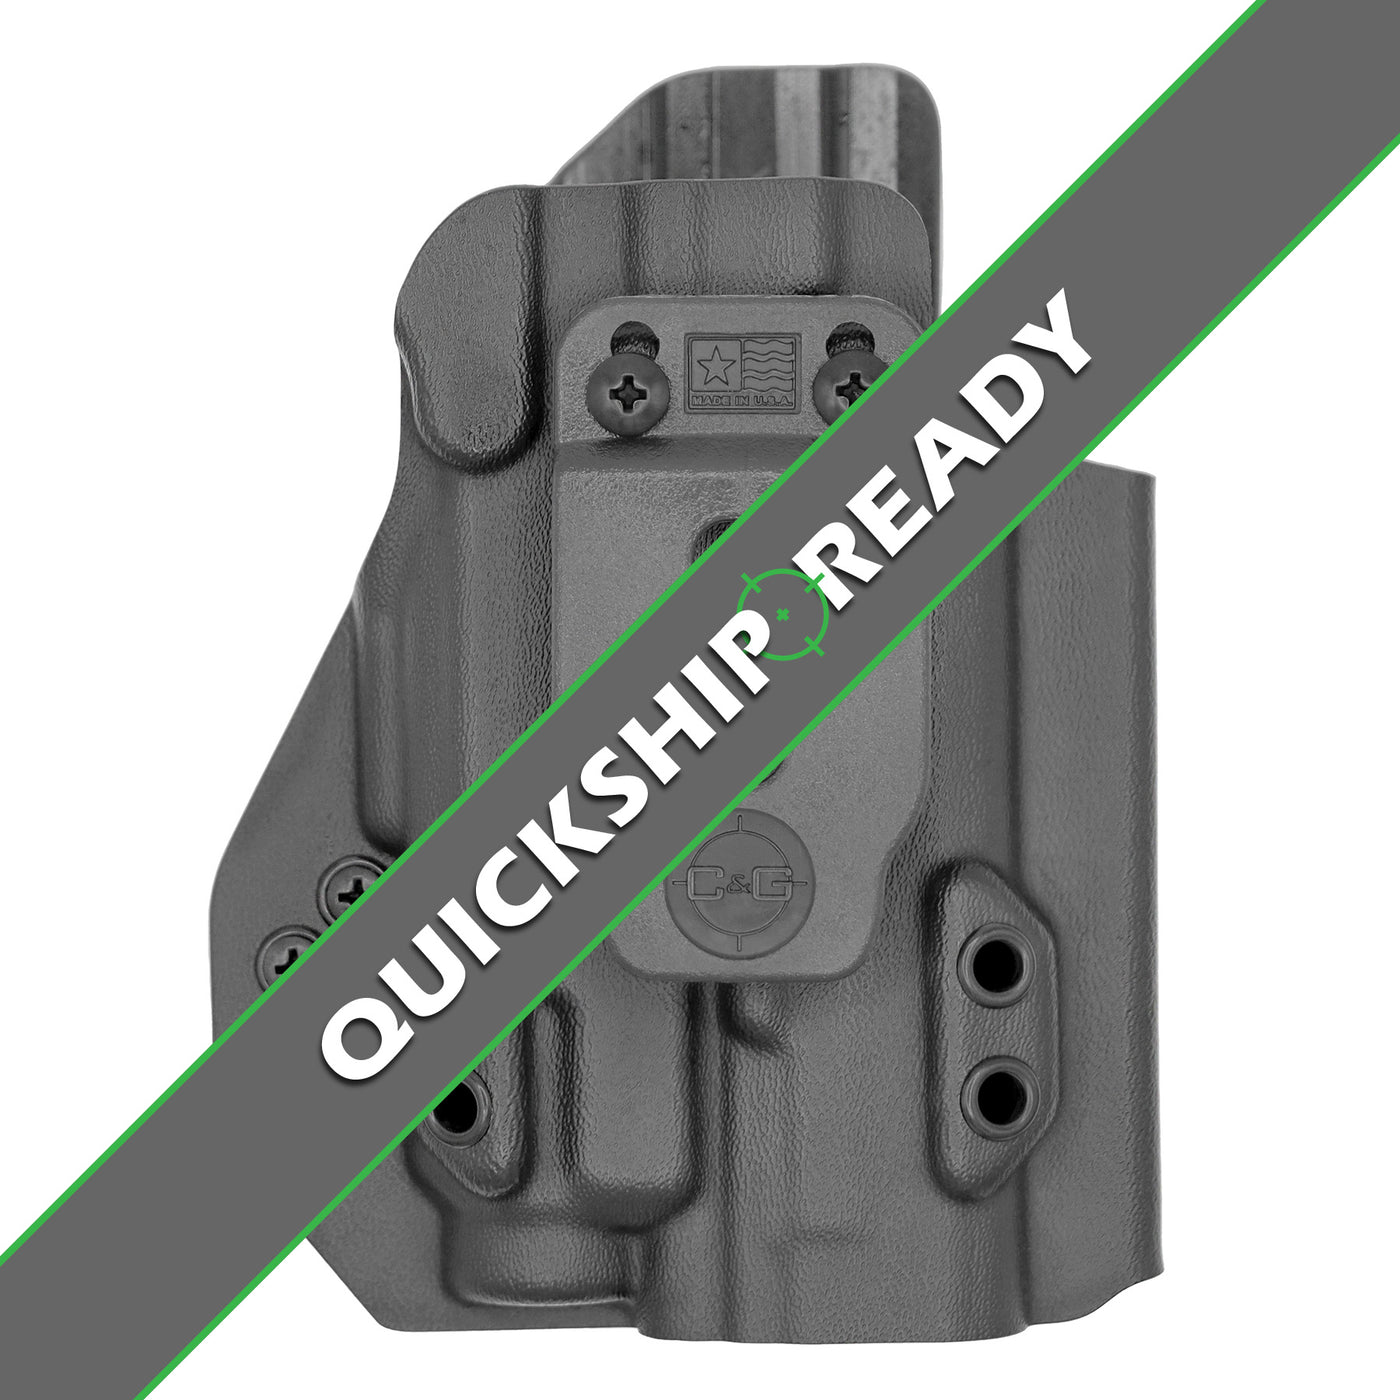 C&G Holsters quickship IWB Tactical CZ P07/09 Streamlight TLR7/a